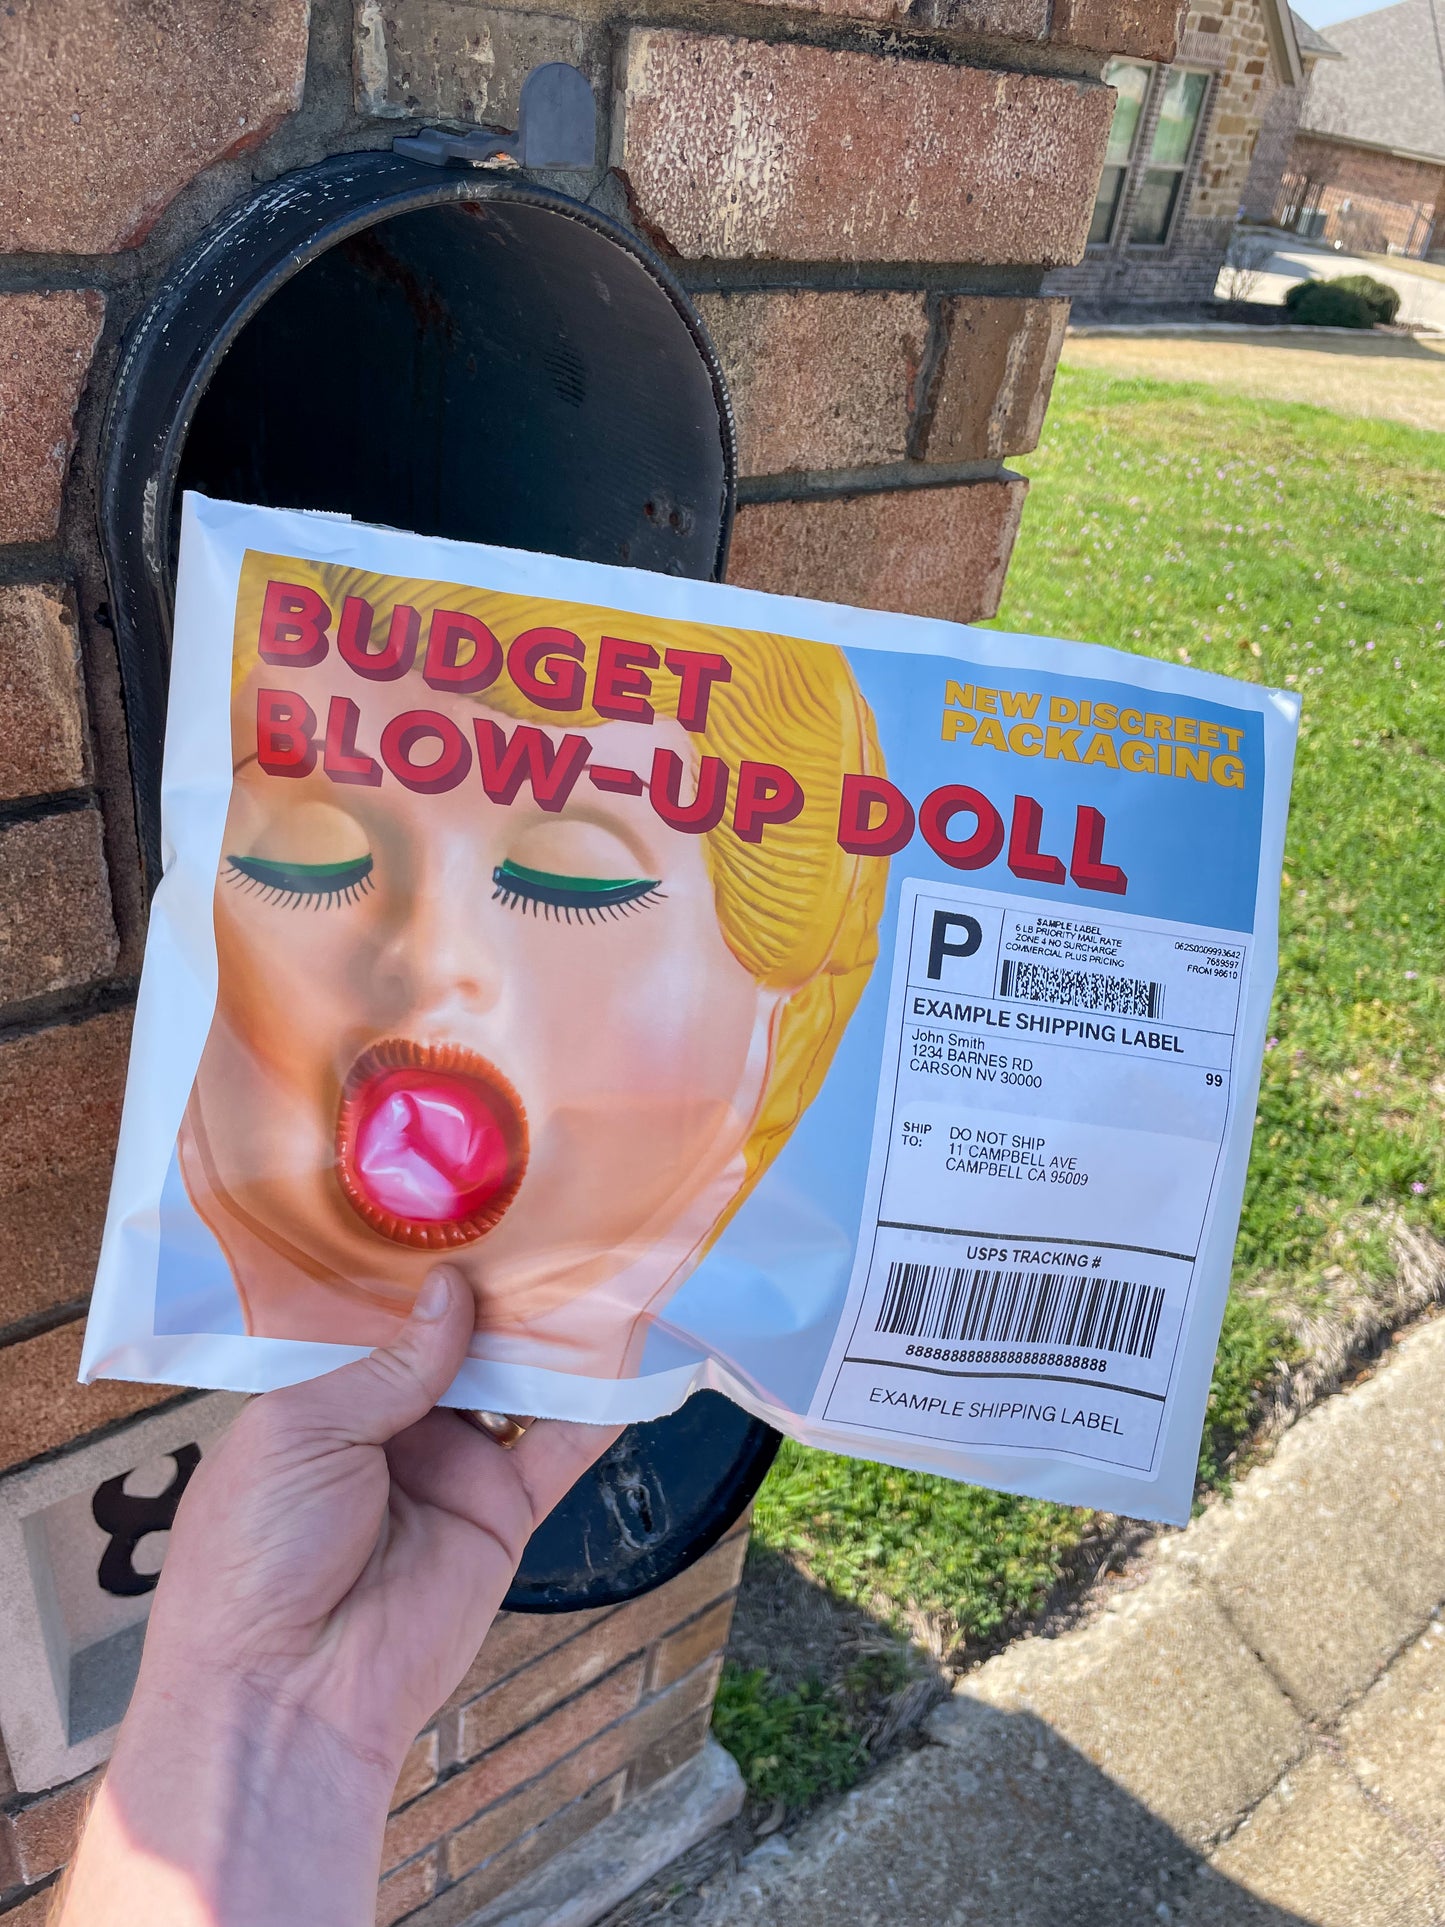 POV of someone opening their mailbox to find a large Blow-Up Doll fake mail prank in their mailbox. Hilarious!